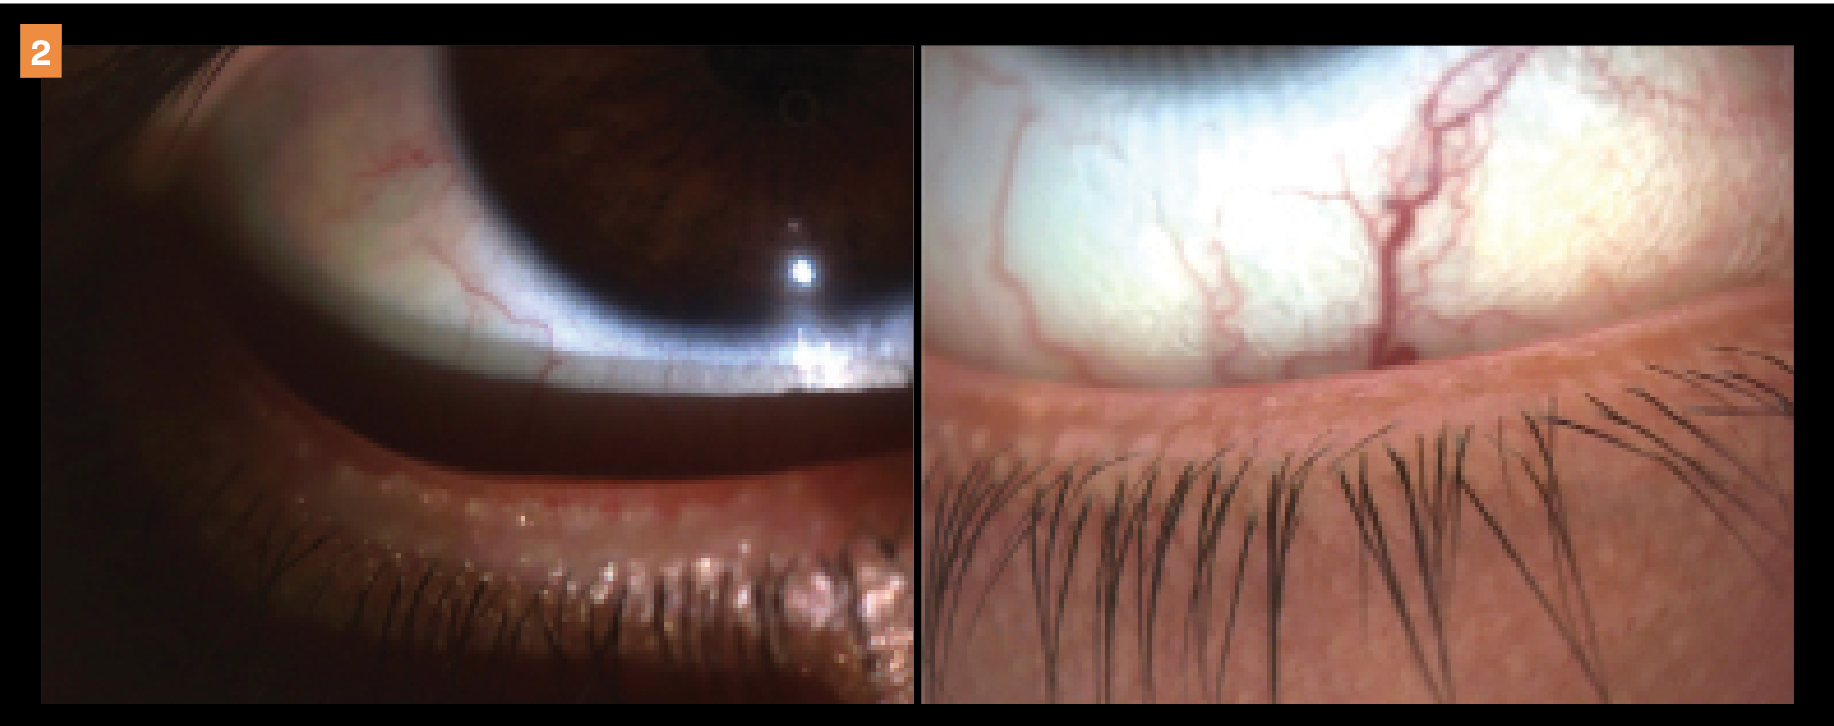 Patient with a recent history of taking oral isotretinoin, which led to dry eye disease and meibomian gland dysfunction. Images show before (left) and after (right) in-office treatments, where the lid margin integrity and meibum function can be seen improving after office-based treatments.